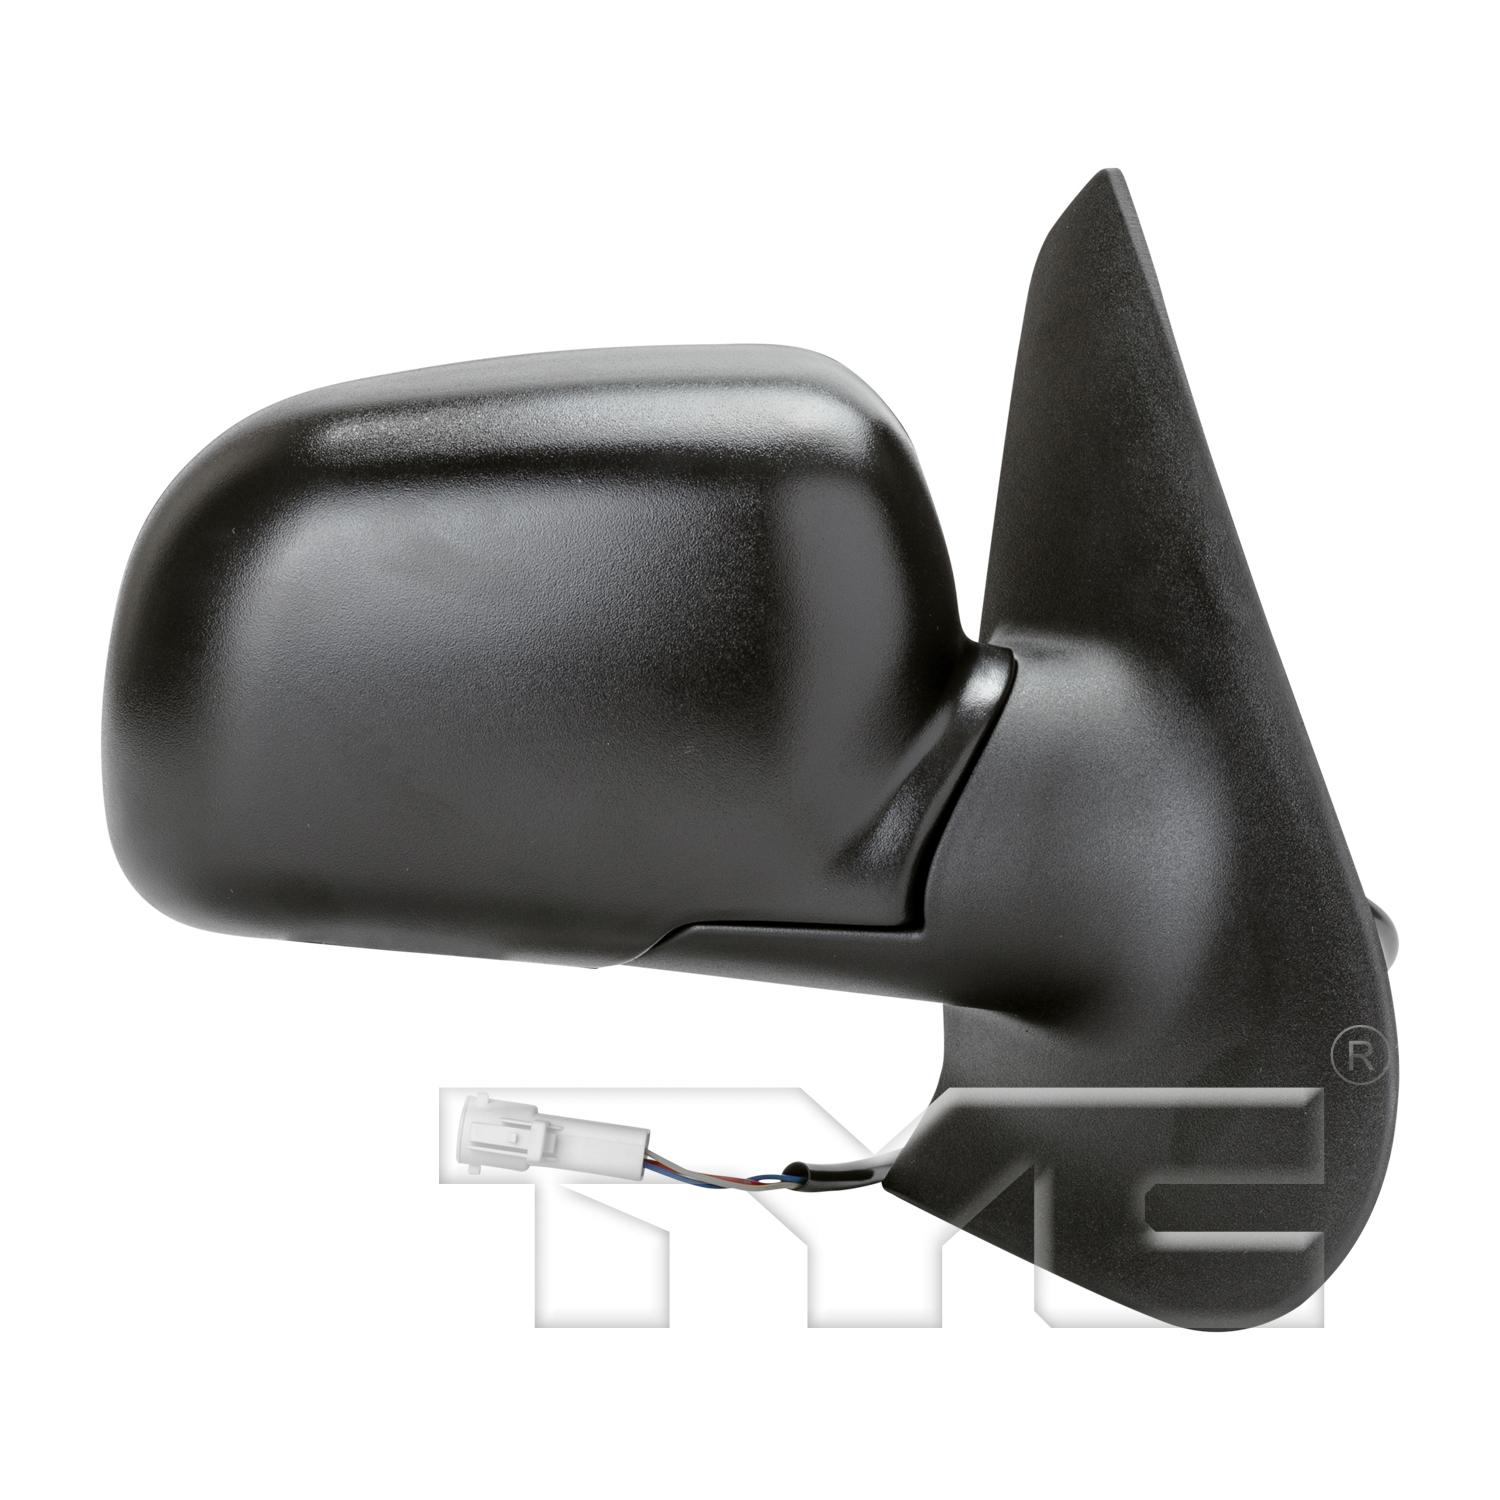 Aftermarket MIRRORS for FORD - EXPLORER SPORT TRAC, EXPLORER SPORT TRAC,01-05,RT Mirror outside rear view